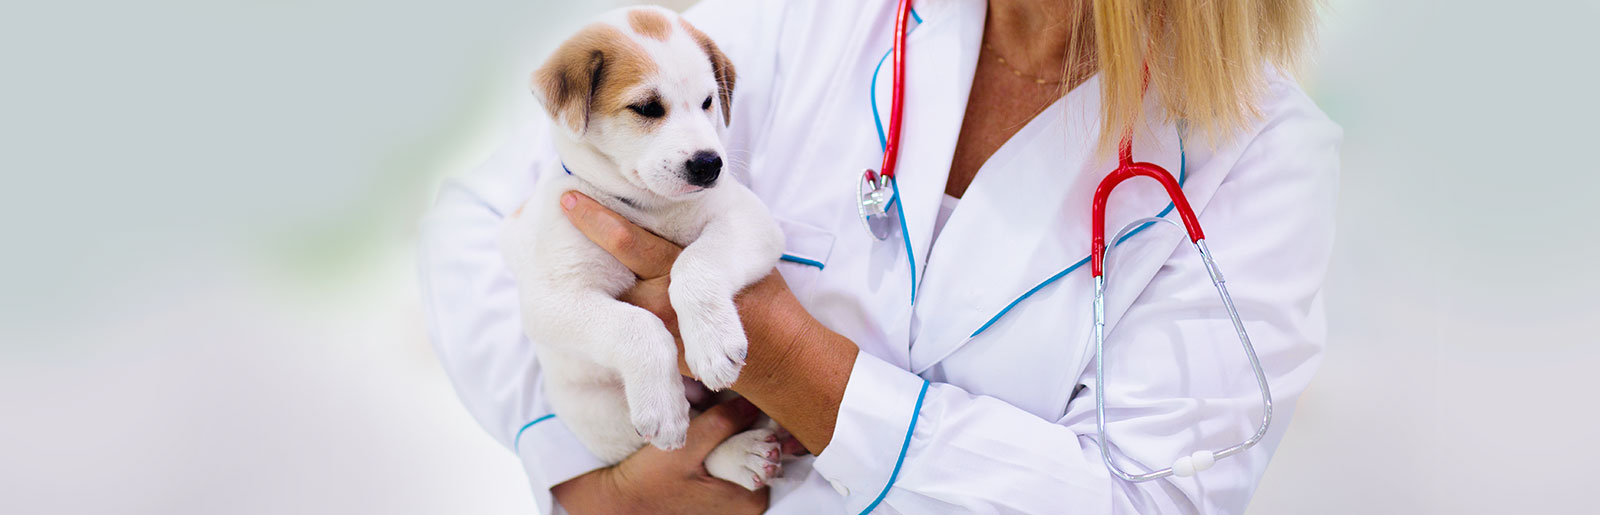 Creating positive experiences when visiting the vet with a puppy